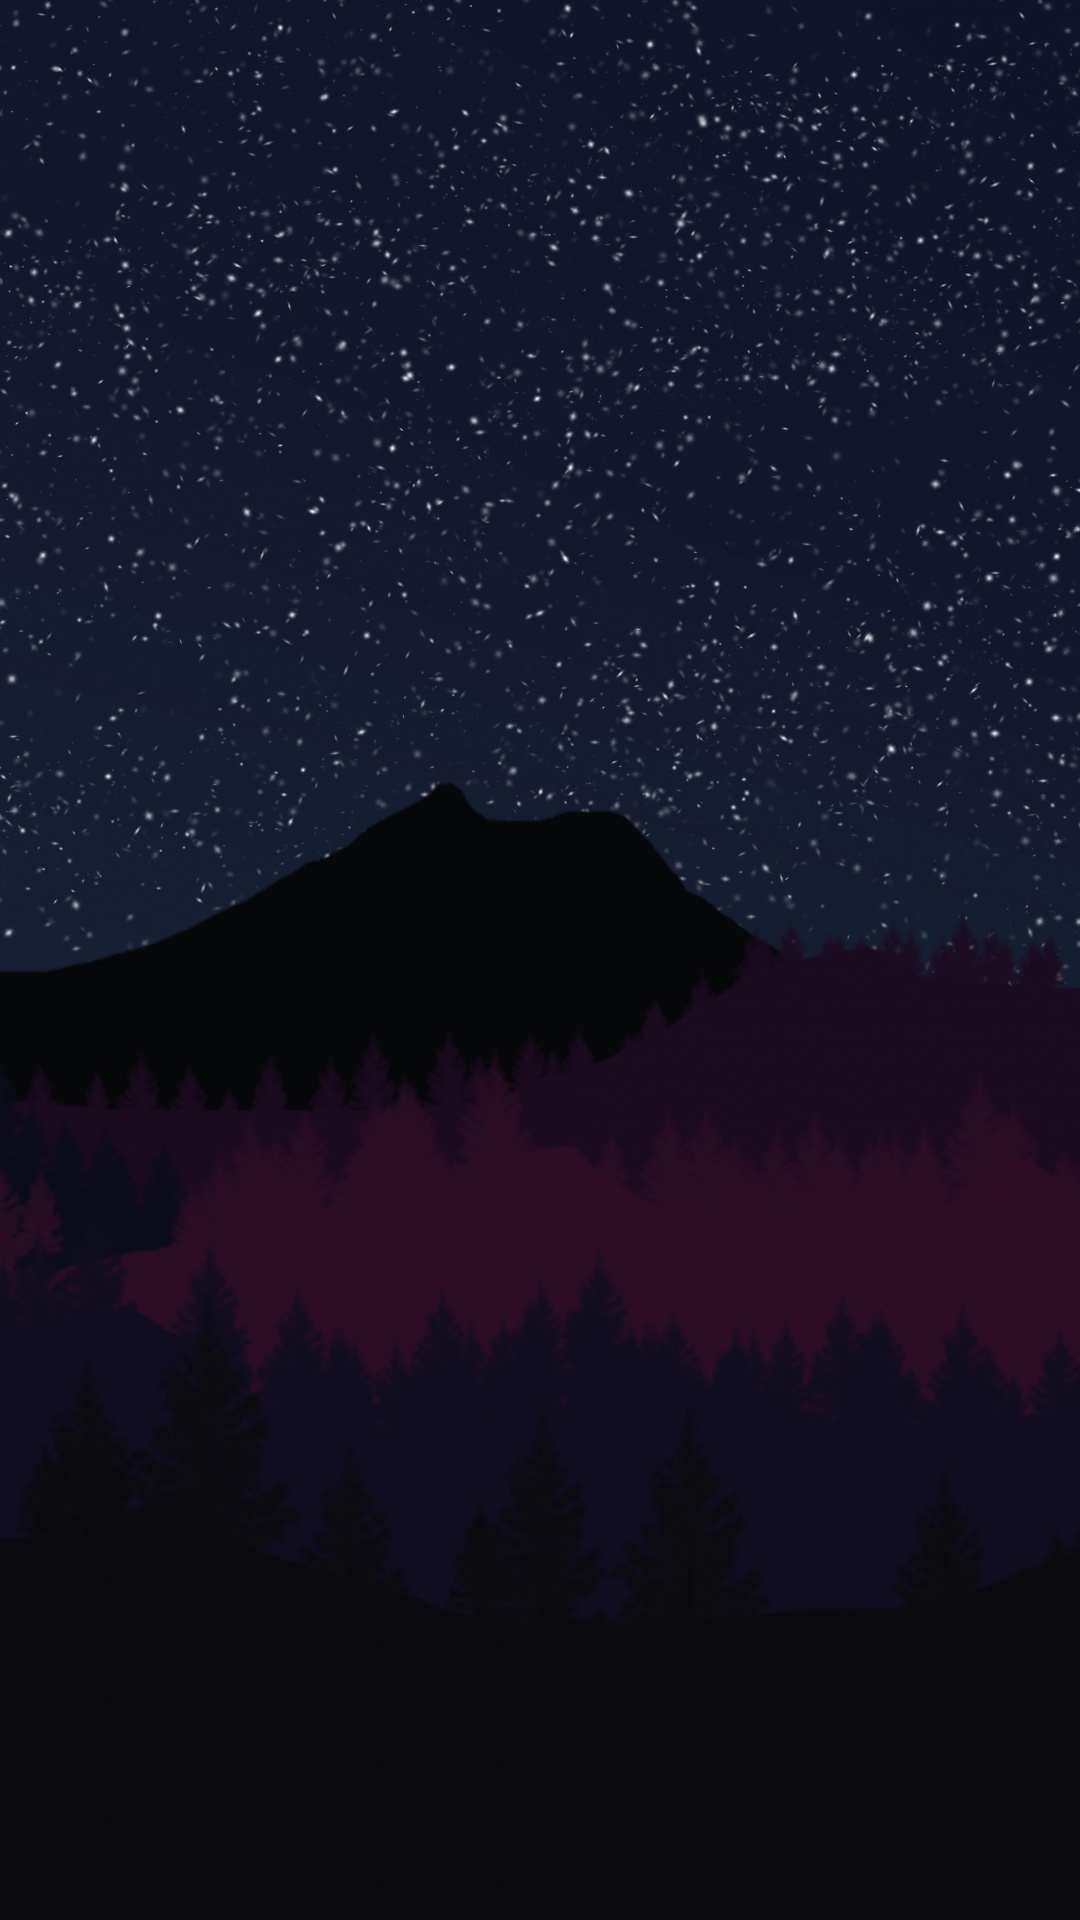 Silhouette of Trees Under Starry Night. Wallpaper in 1080x1920 Resolution